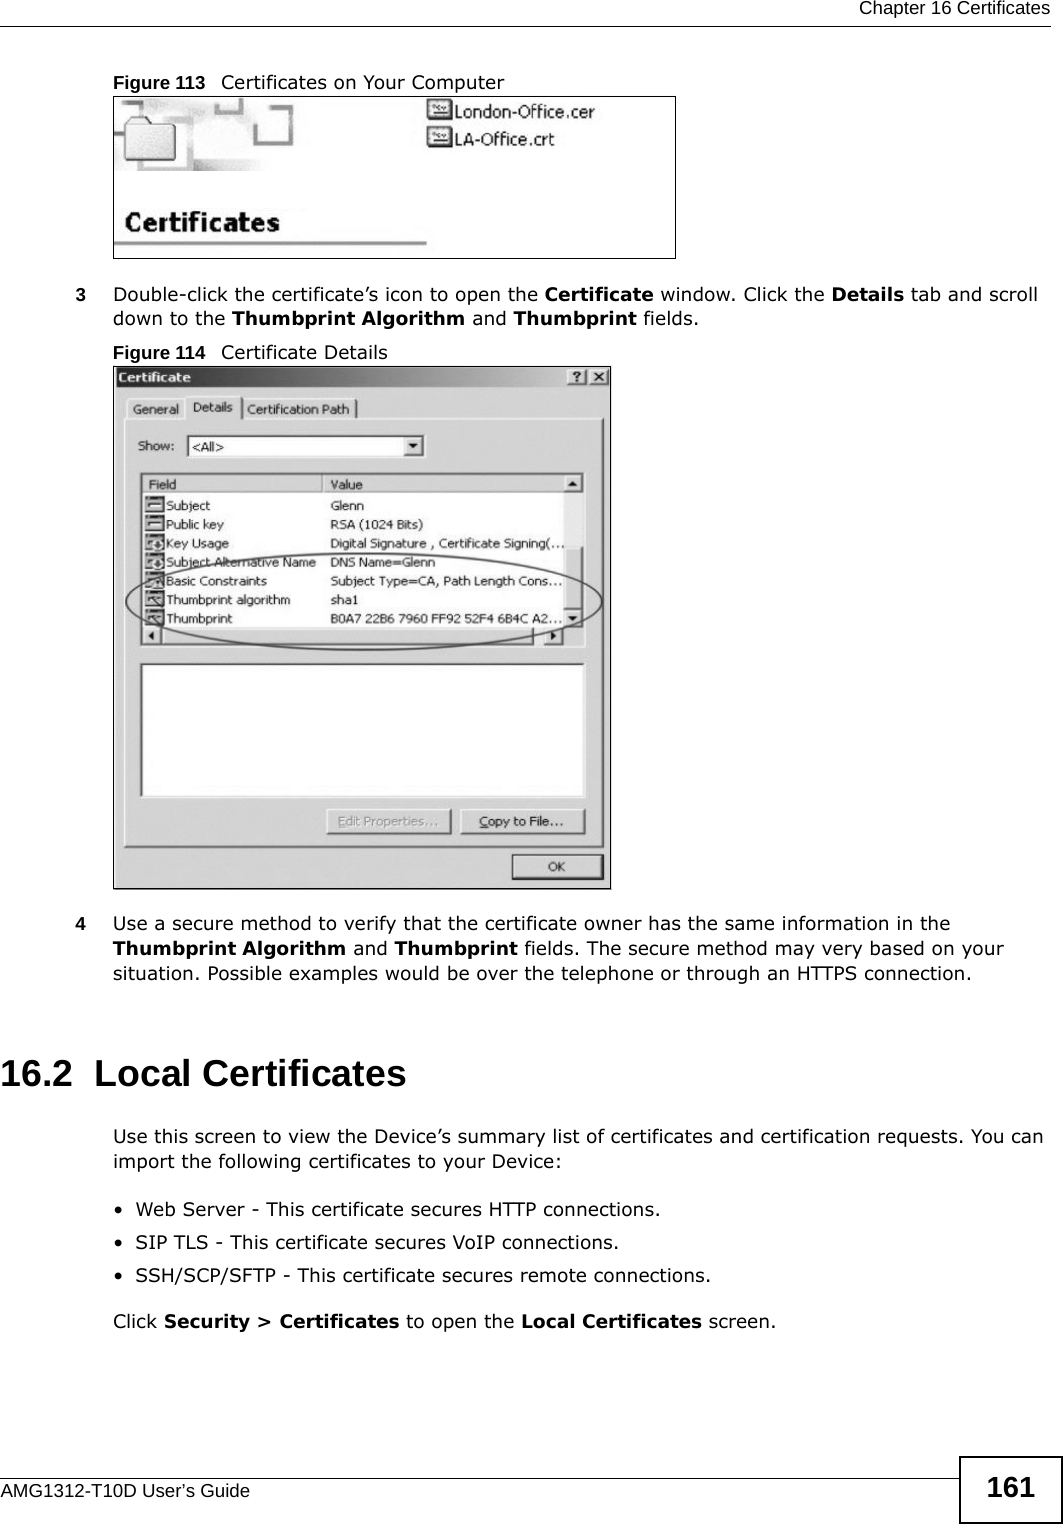  Chapter 16 CertificatesAMG1312-T10D User’s Guide 161Figure 113   Certificates on Your Computer3Double-click the certificate’s icon to open the Certificate window. Click the Details tab and scroll down to the Thumbprint Algorithm and Thumbprint fields.Figure 114   Certificate Details 4Use a secure method to verify that the certificate owner has the same information in the Thumbprint Algorithm and Thumbprint fields. The secure method may very based on your situation. Possible examples would be over the telephone or through an HTTPS connection. 16.2  Local CertificatesUse this screen to view the Device’s summary list of certificates and certification requests. You can import the following certificates to your Device:• Web Server - This certificate secures HTTP connections.• SIP TLS - This certificate secures VoIP connections.• SSH/SCP/SFTP - This certificate secures remote connections.Click Security &gt; Certificates to open the Local Certificates screen. 